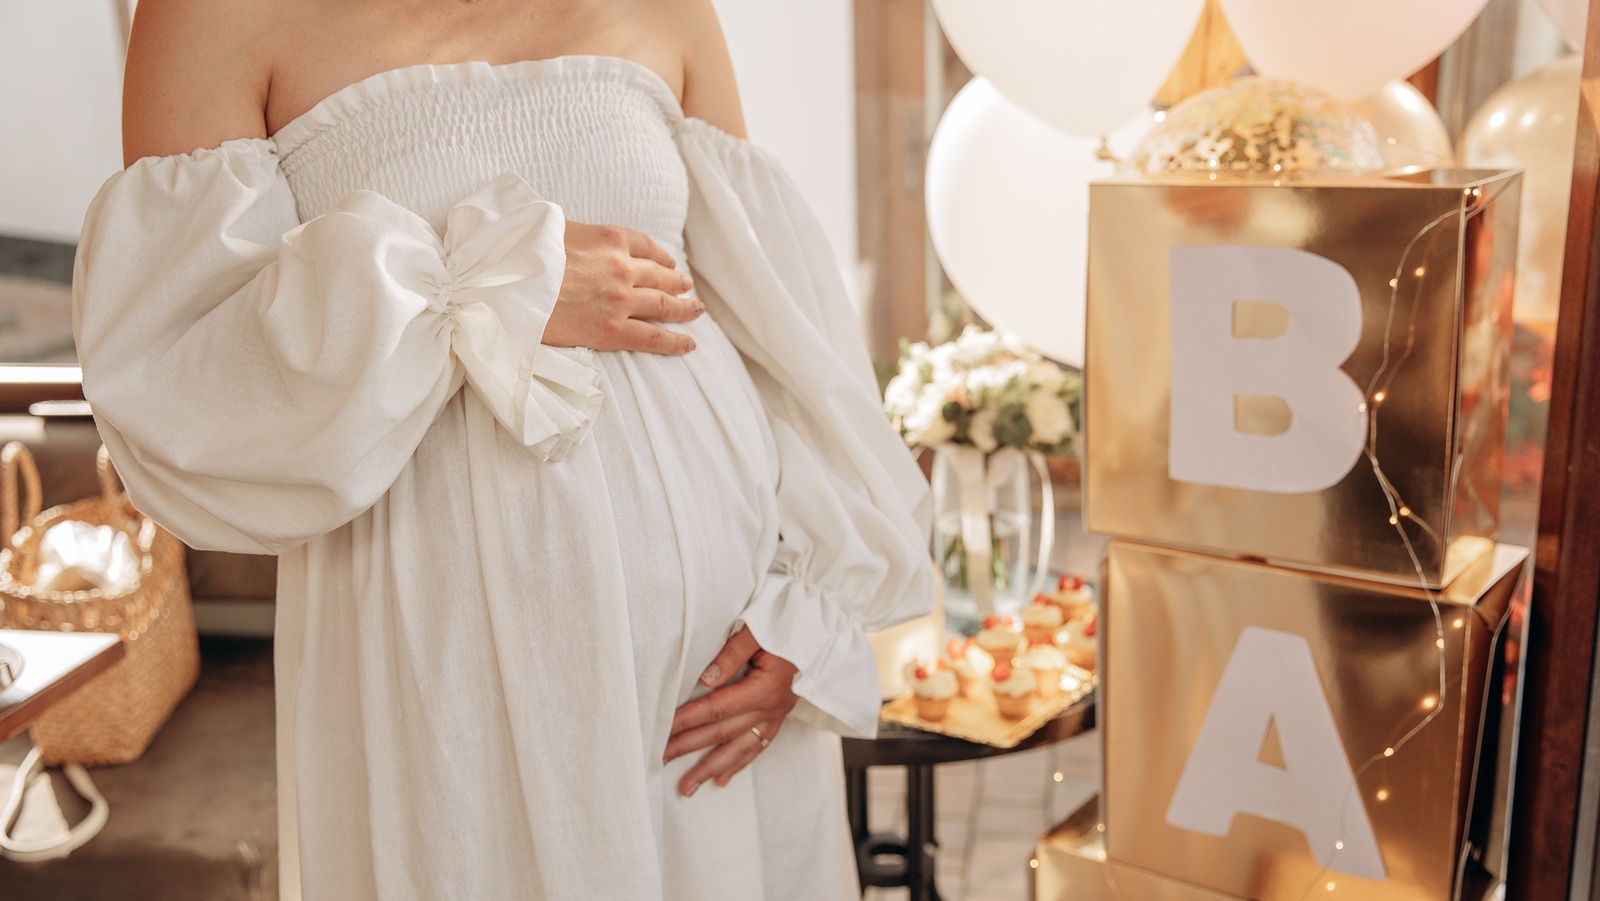 Outdated Baby Shower Traditions You Should Skip – Glam